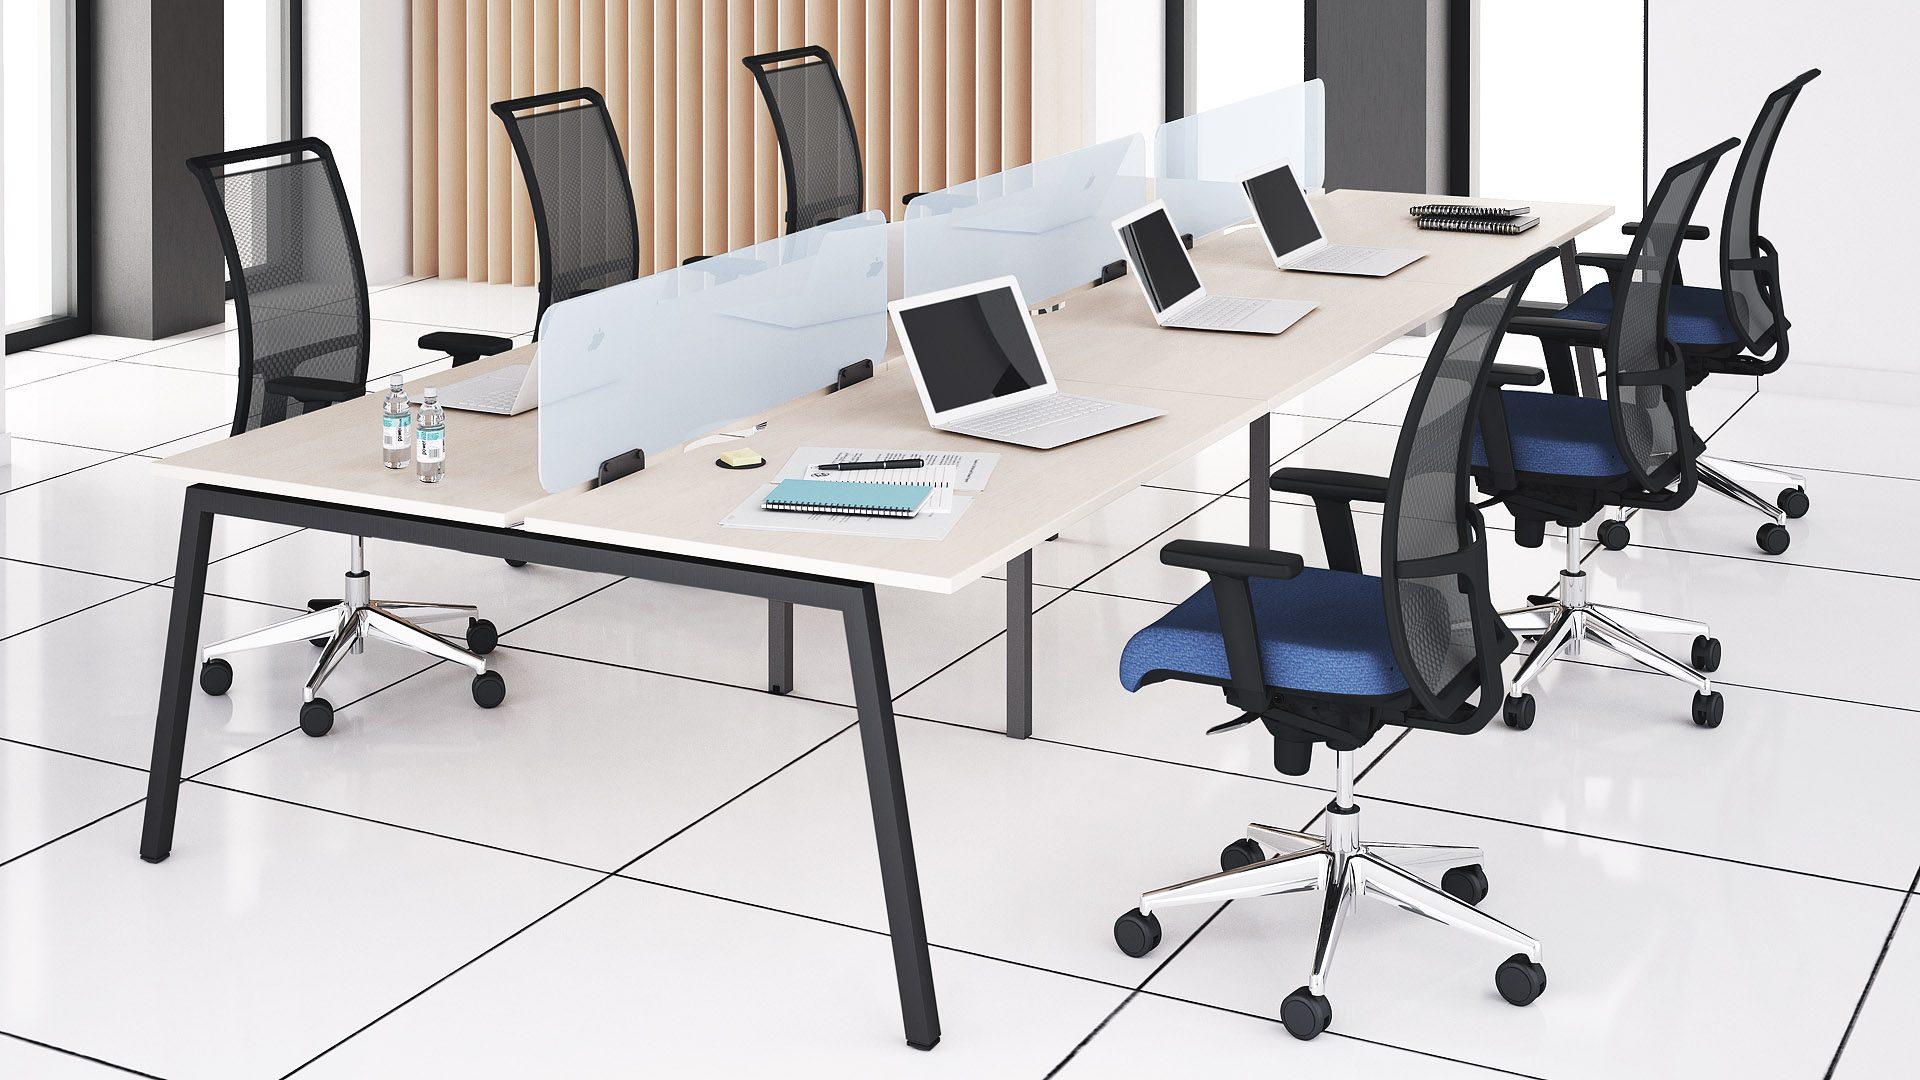 Unframed Perspex® screens can be fitted to many different types of desking.